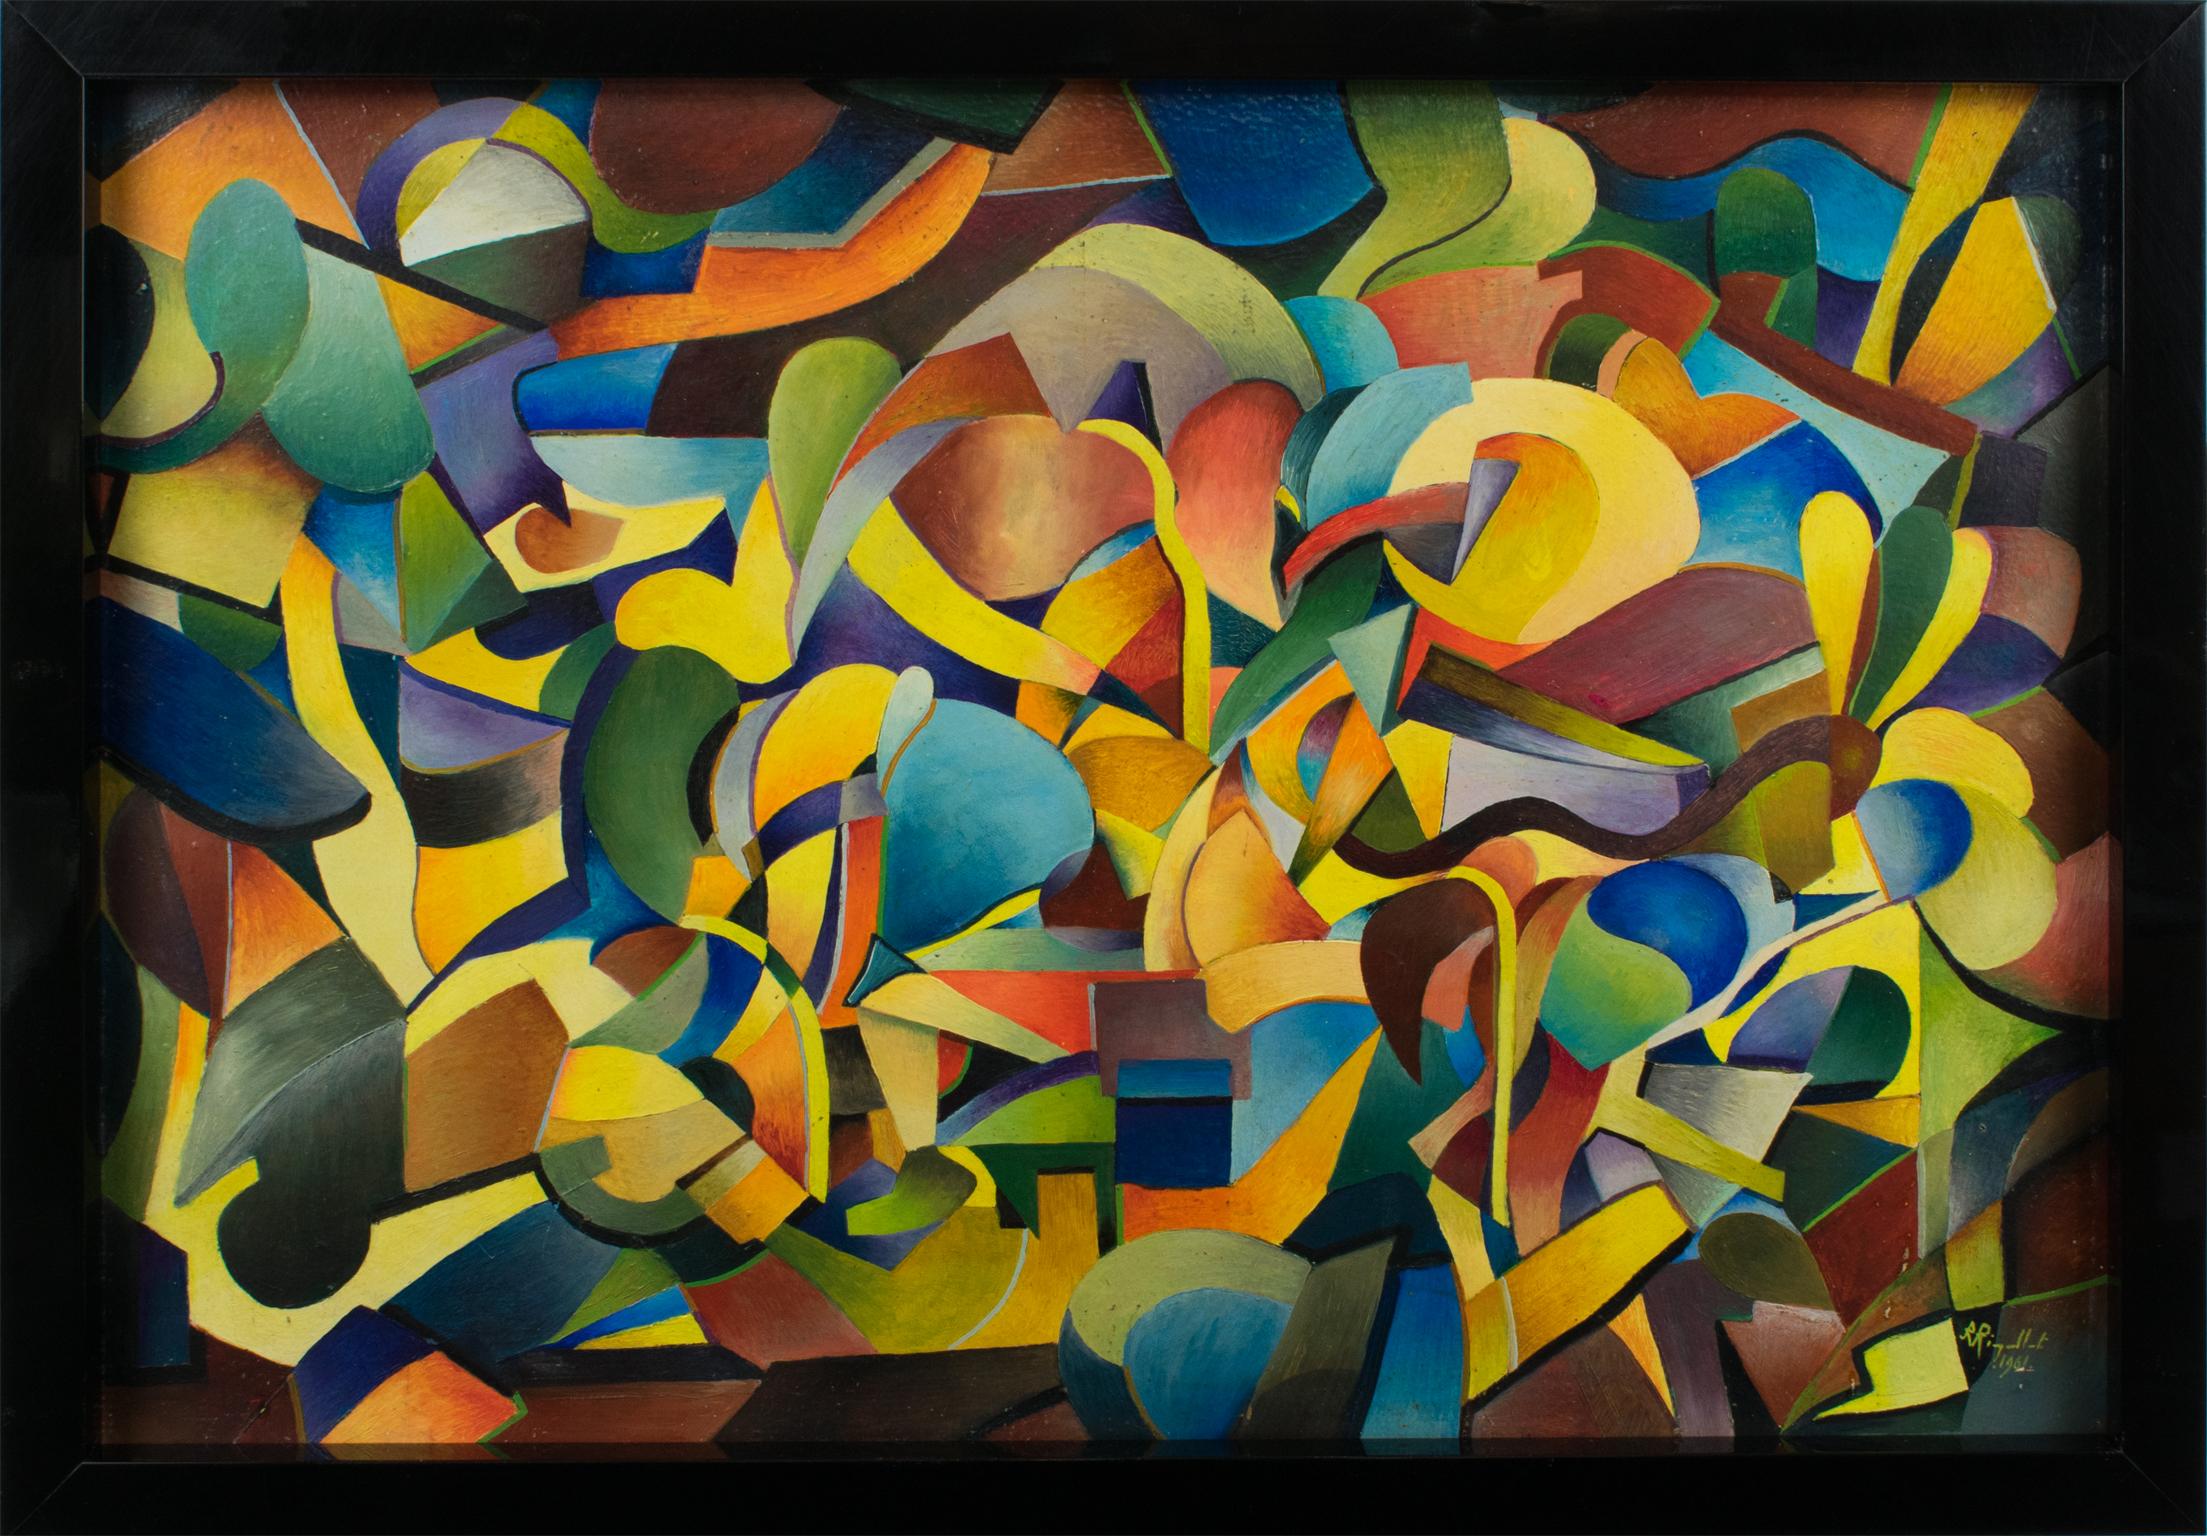 This mesmerizing post-cubist and colorist abstract oil on board painting was designed by A. Rigollot (France, 20th Century).
Colorist paintings are characterized by intense color use, which becomes the dominant characteristic of the resulting work